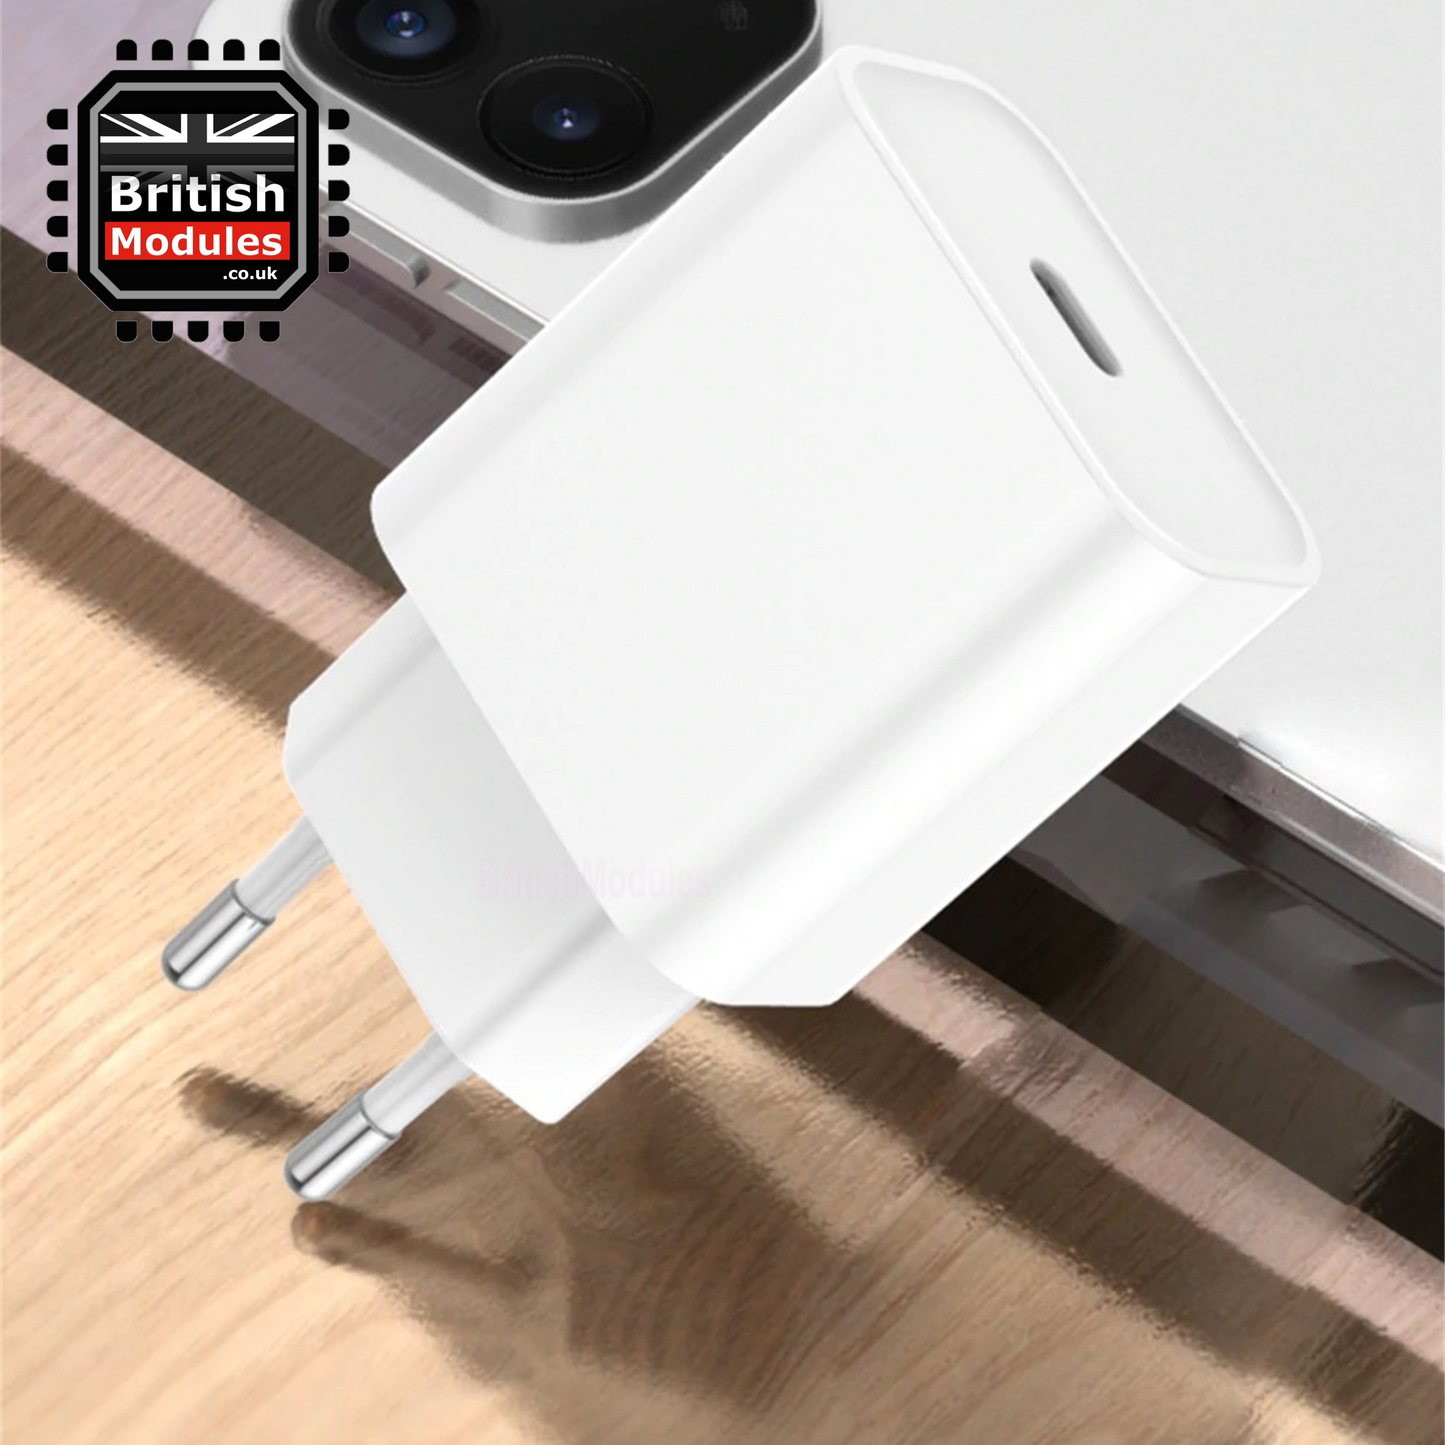 PD 20W Fast Charging USB-C Power Adapter EU Plug for iPhone Charger Head